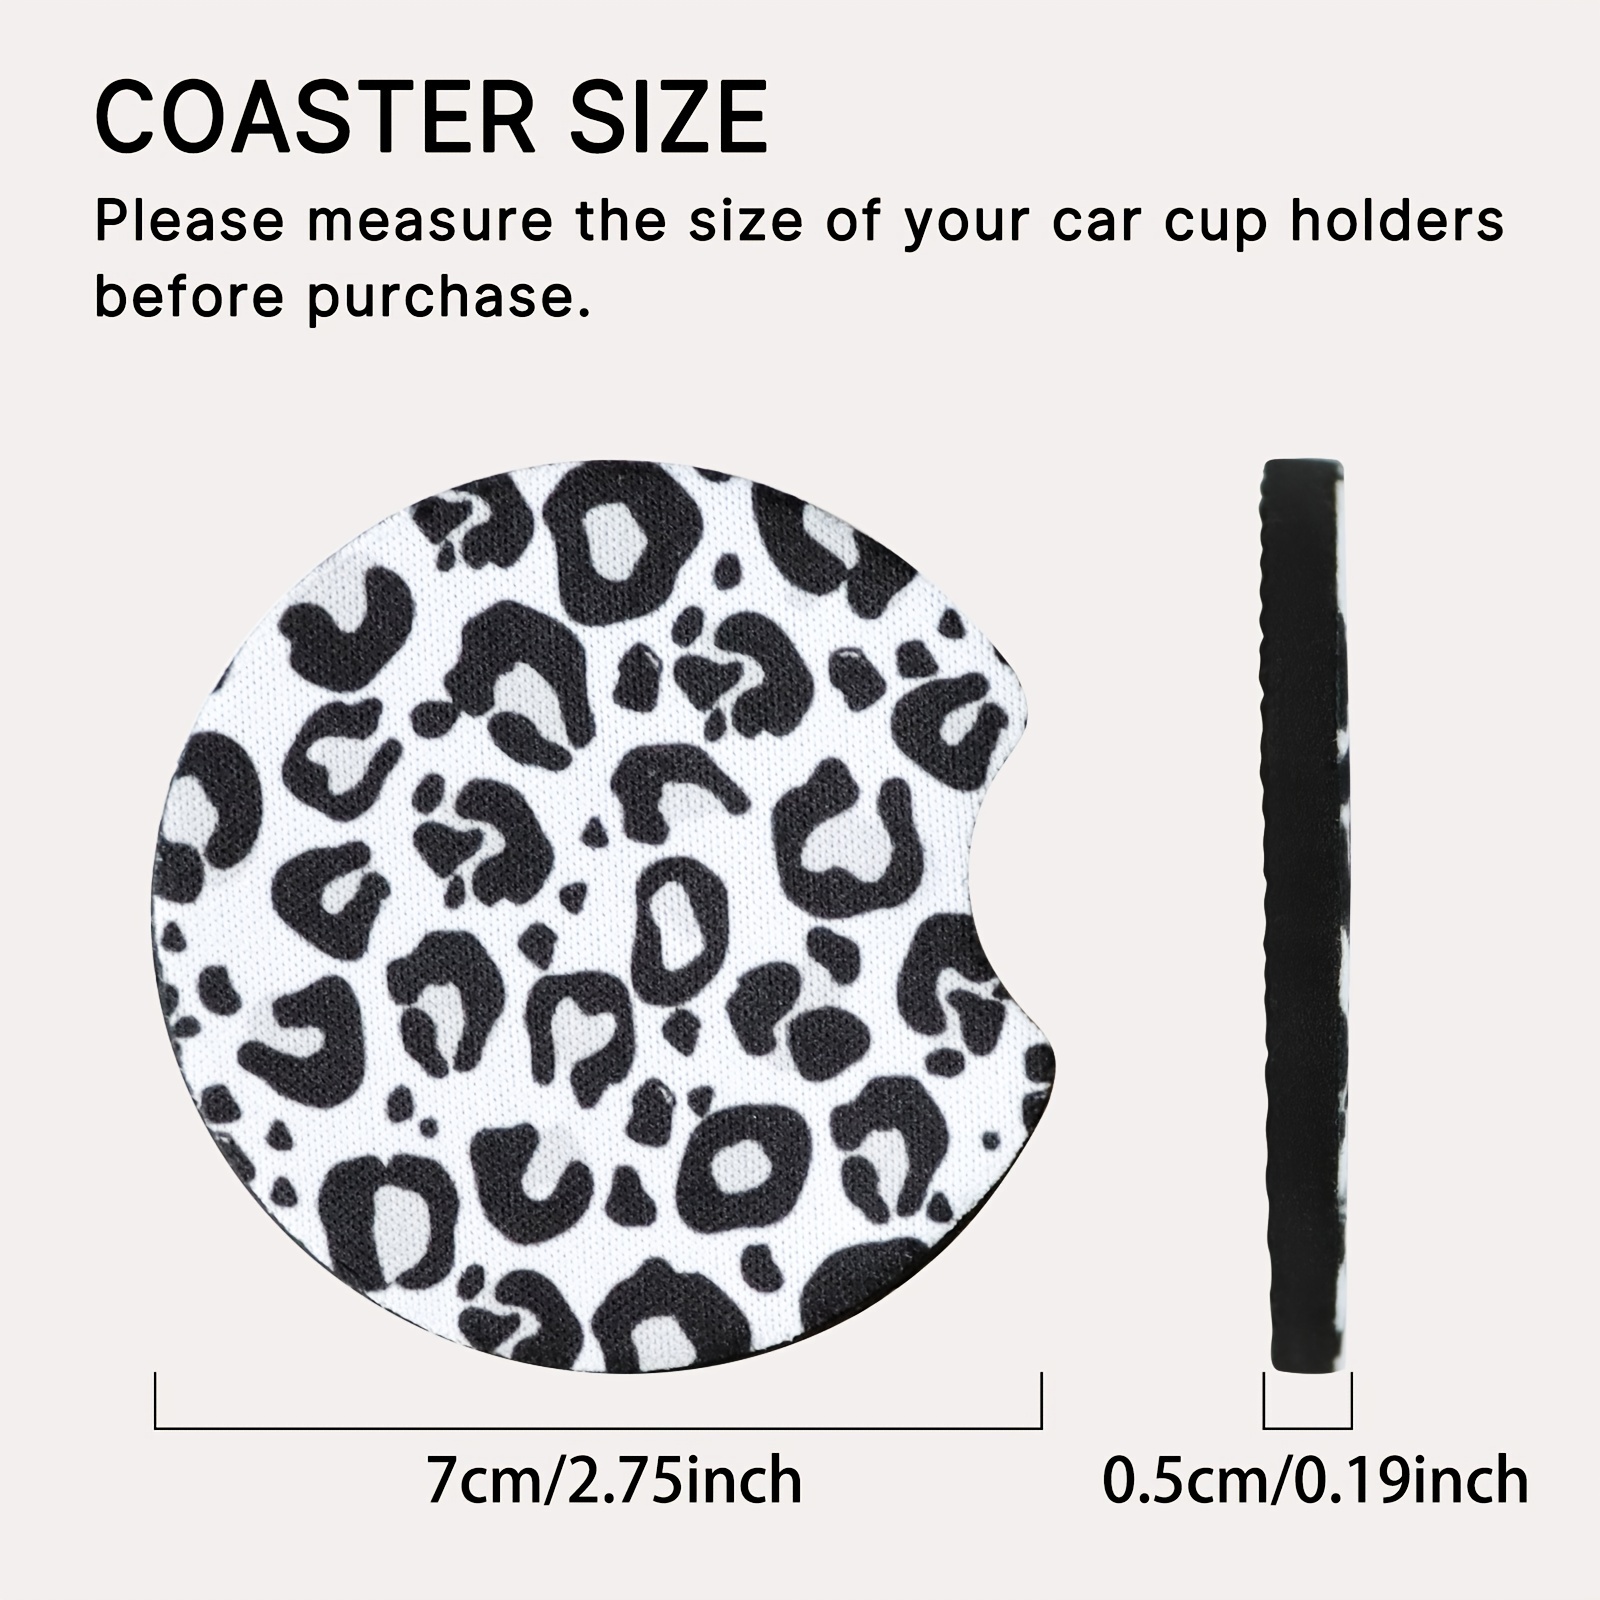  Car Coasters for Cup Holders, 2.75 Inch Auto Cup